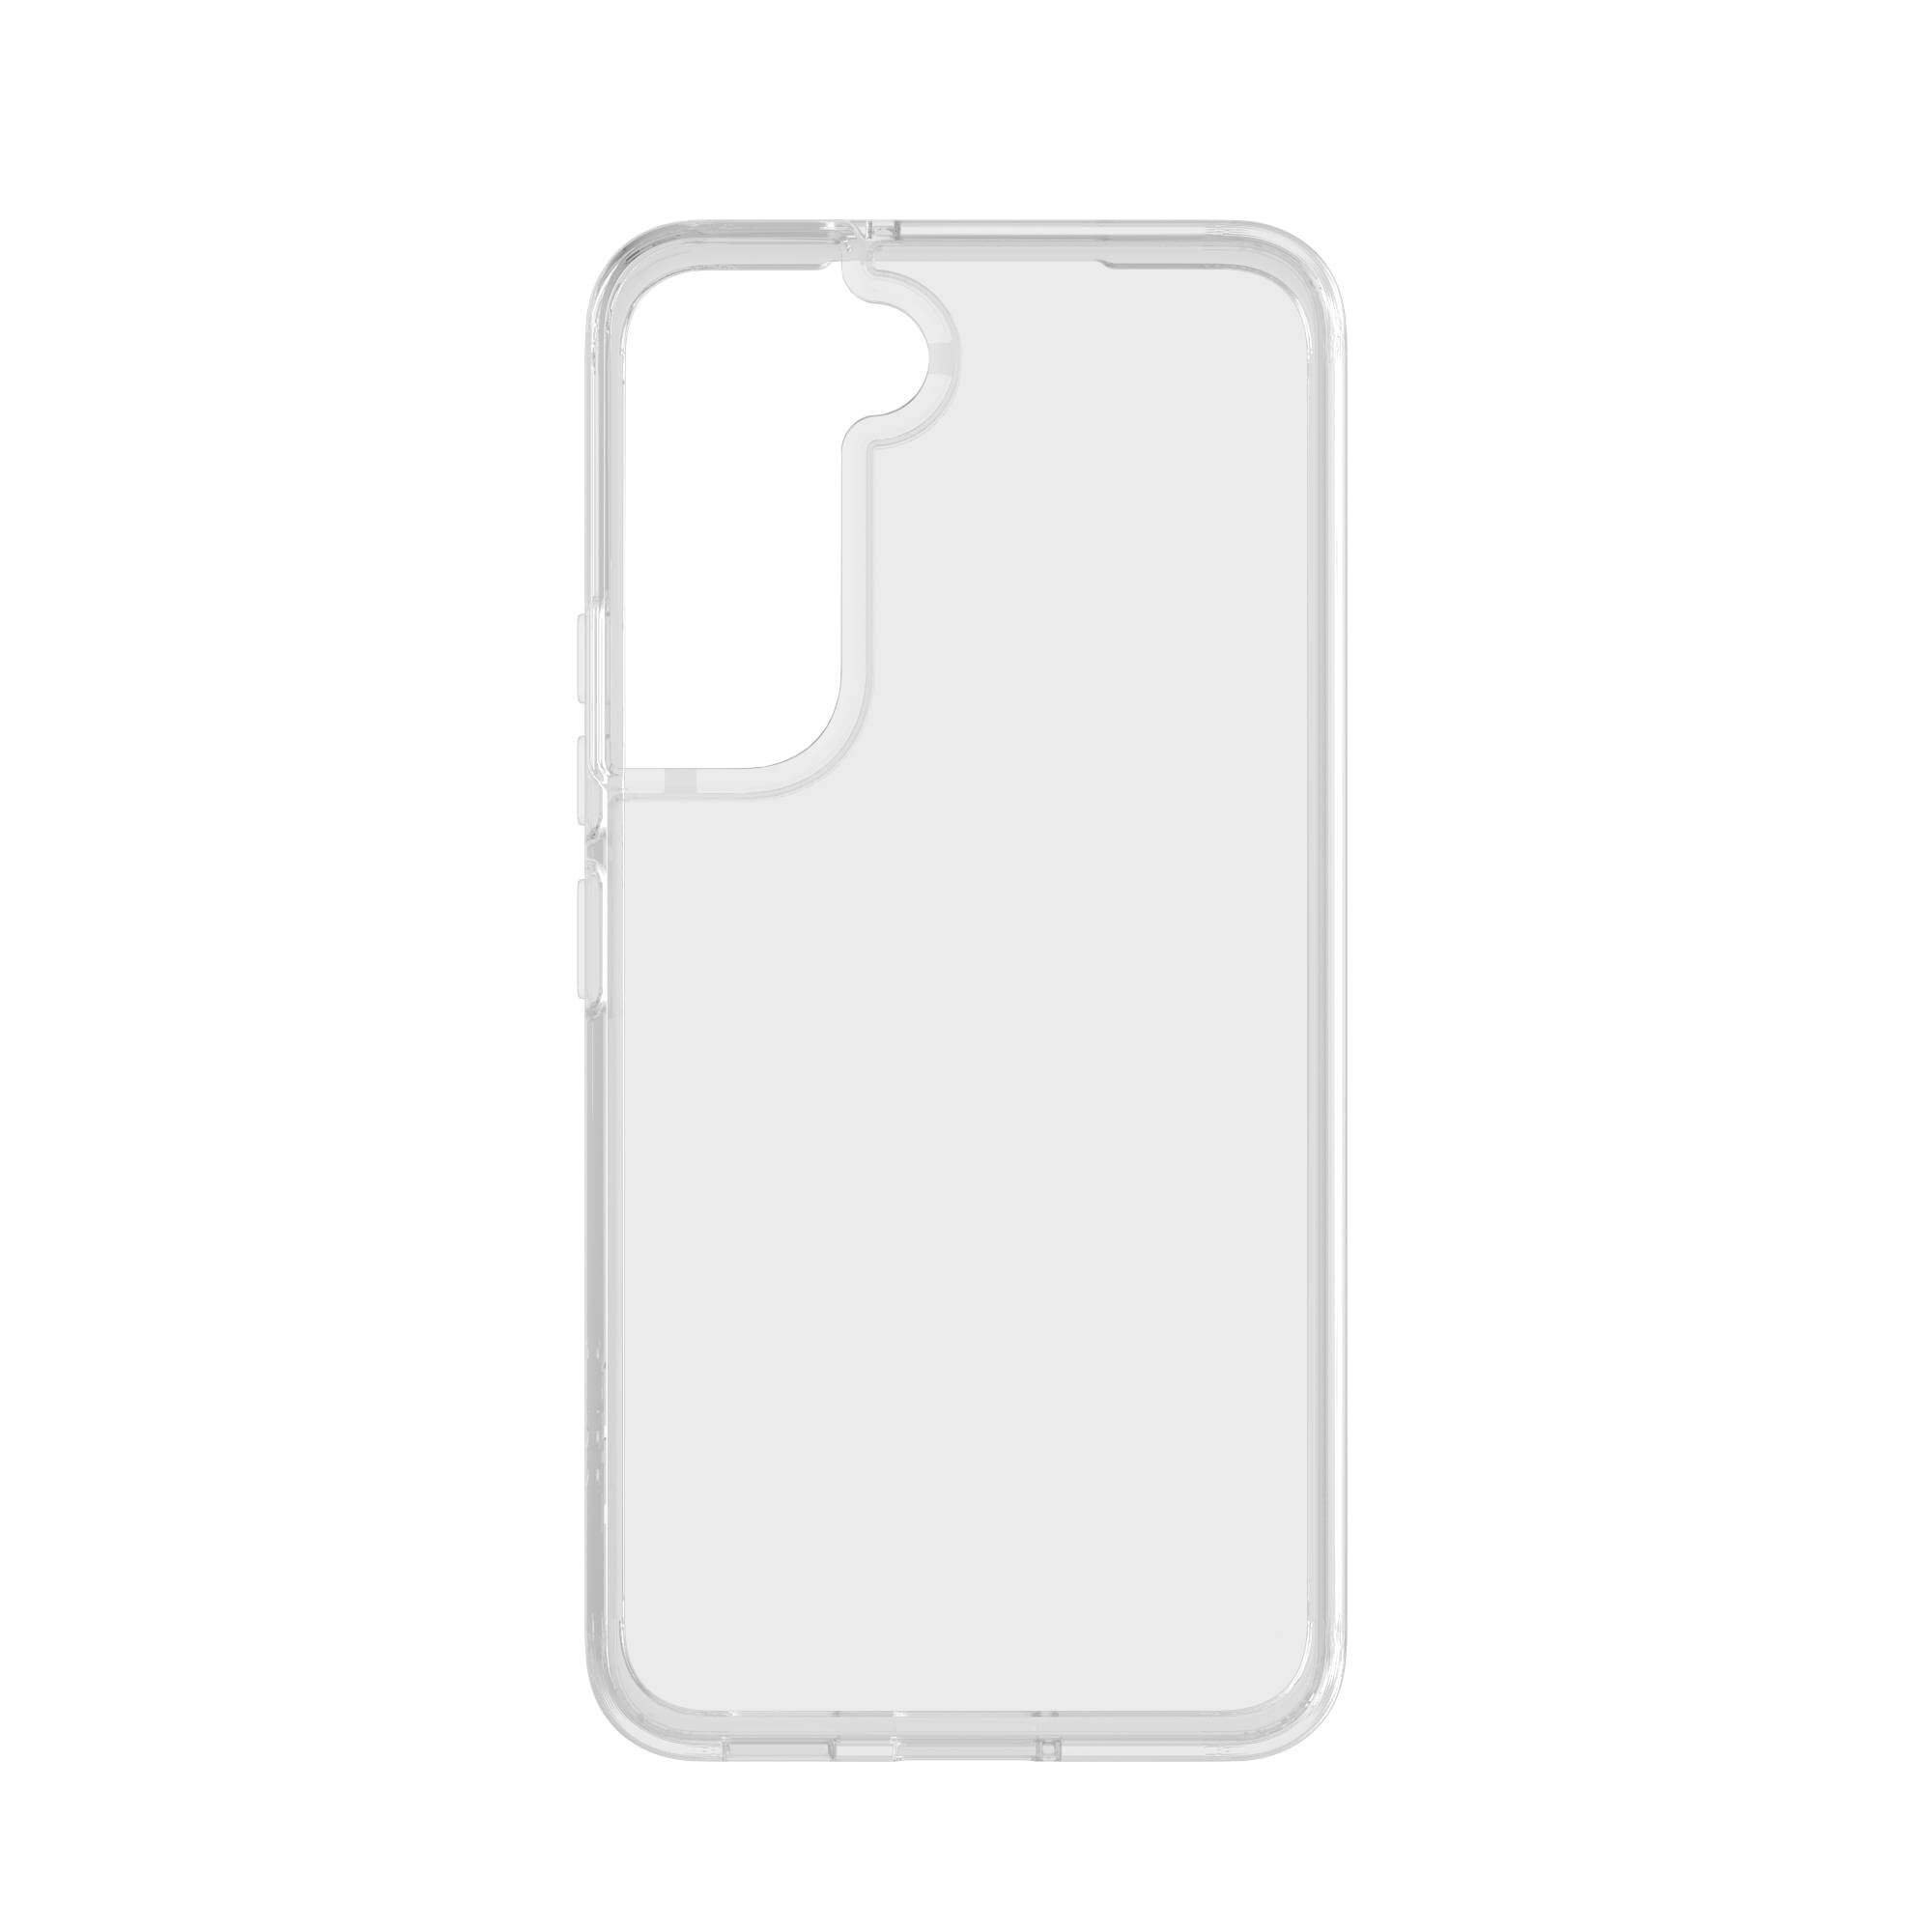 SKECH S22+ 5G, Galaxy Samsung, transparent Backcover, Crystal,